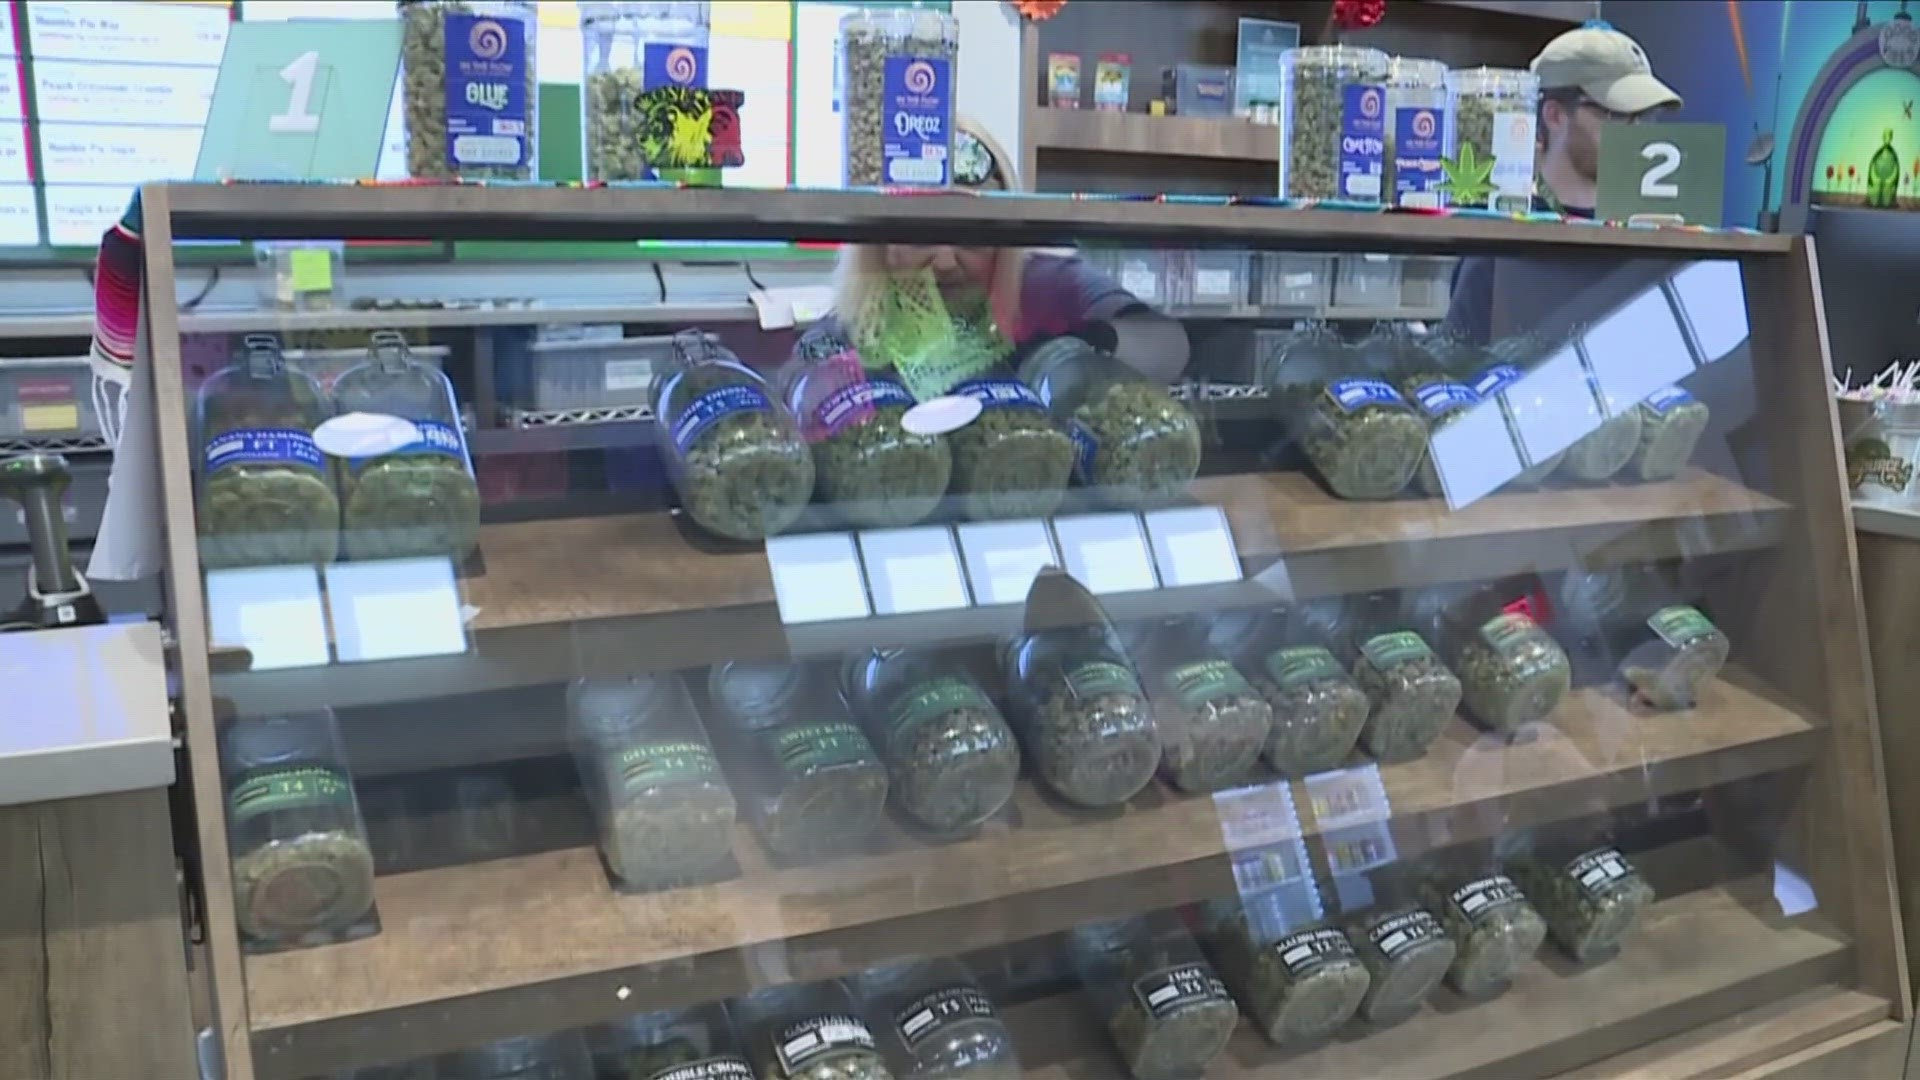 A dispensary called Good Day Farm has filed a lawsuit against Arkansas, saying advertising laws are too restrictive.